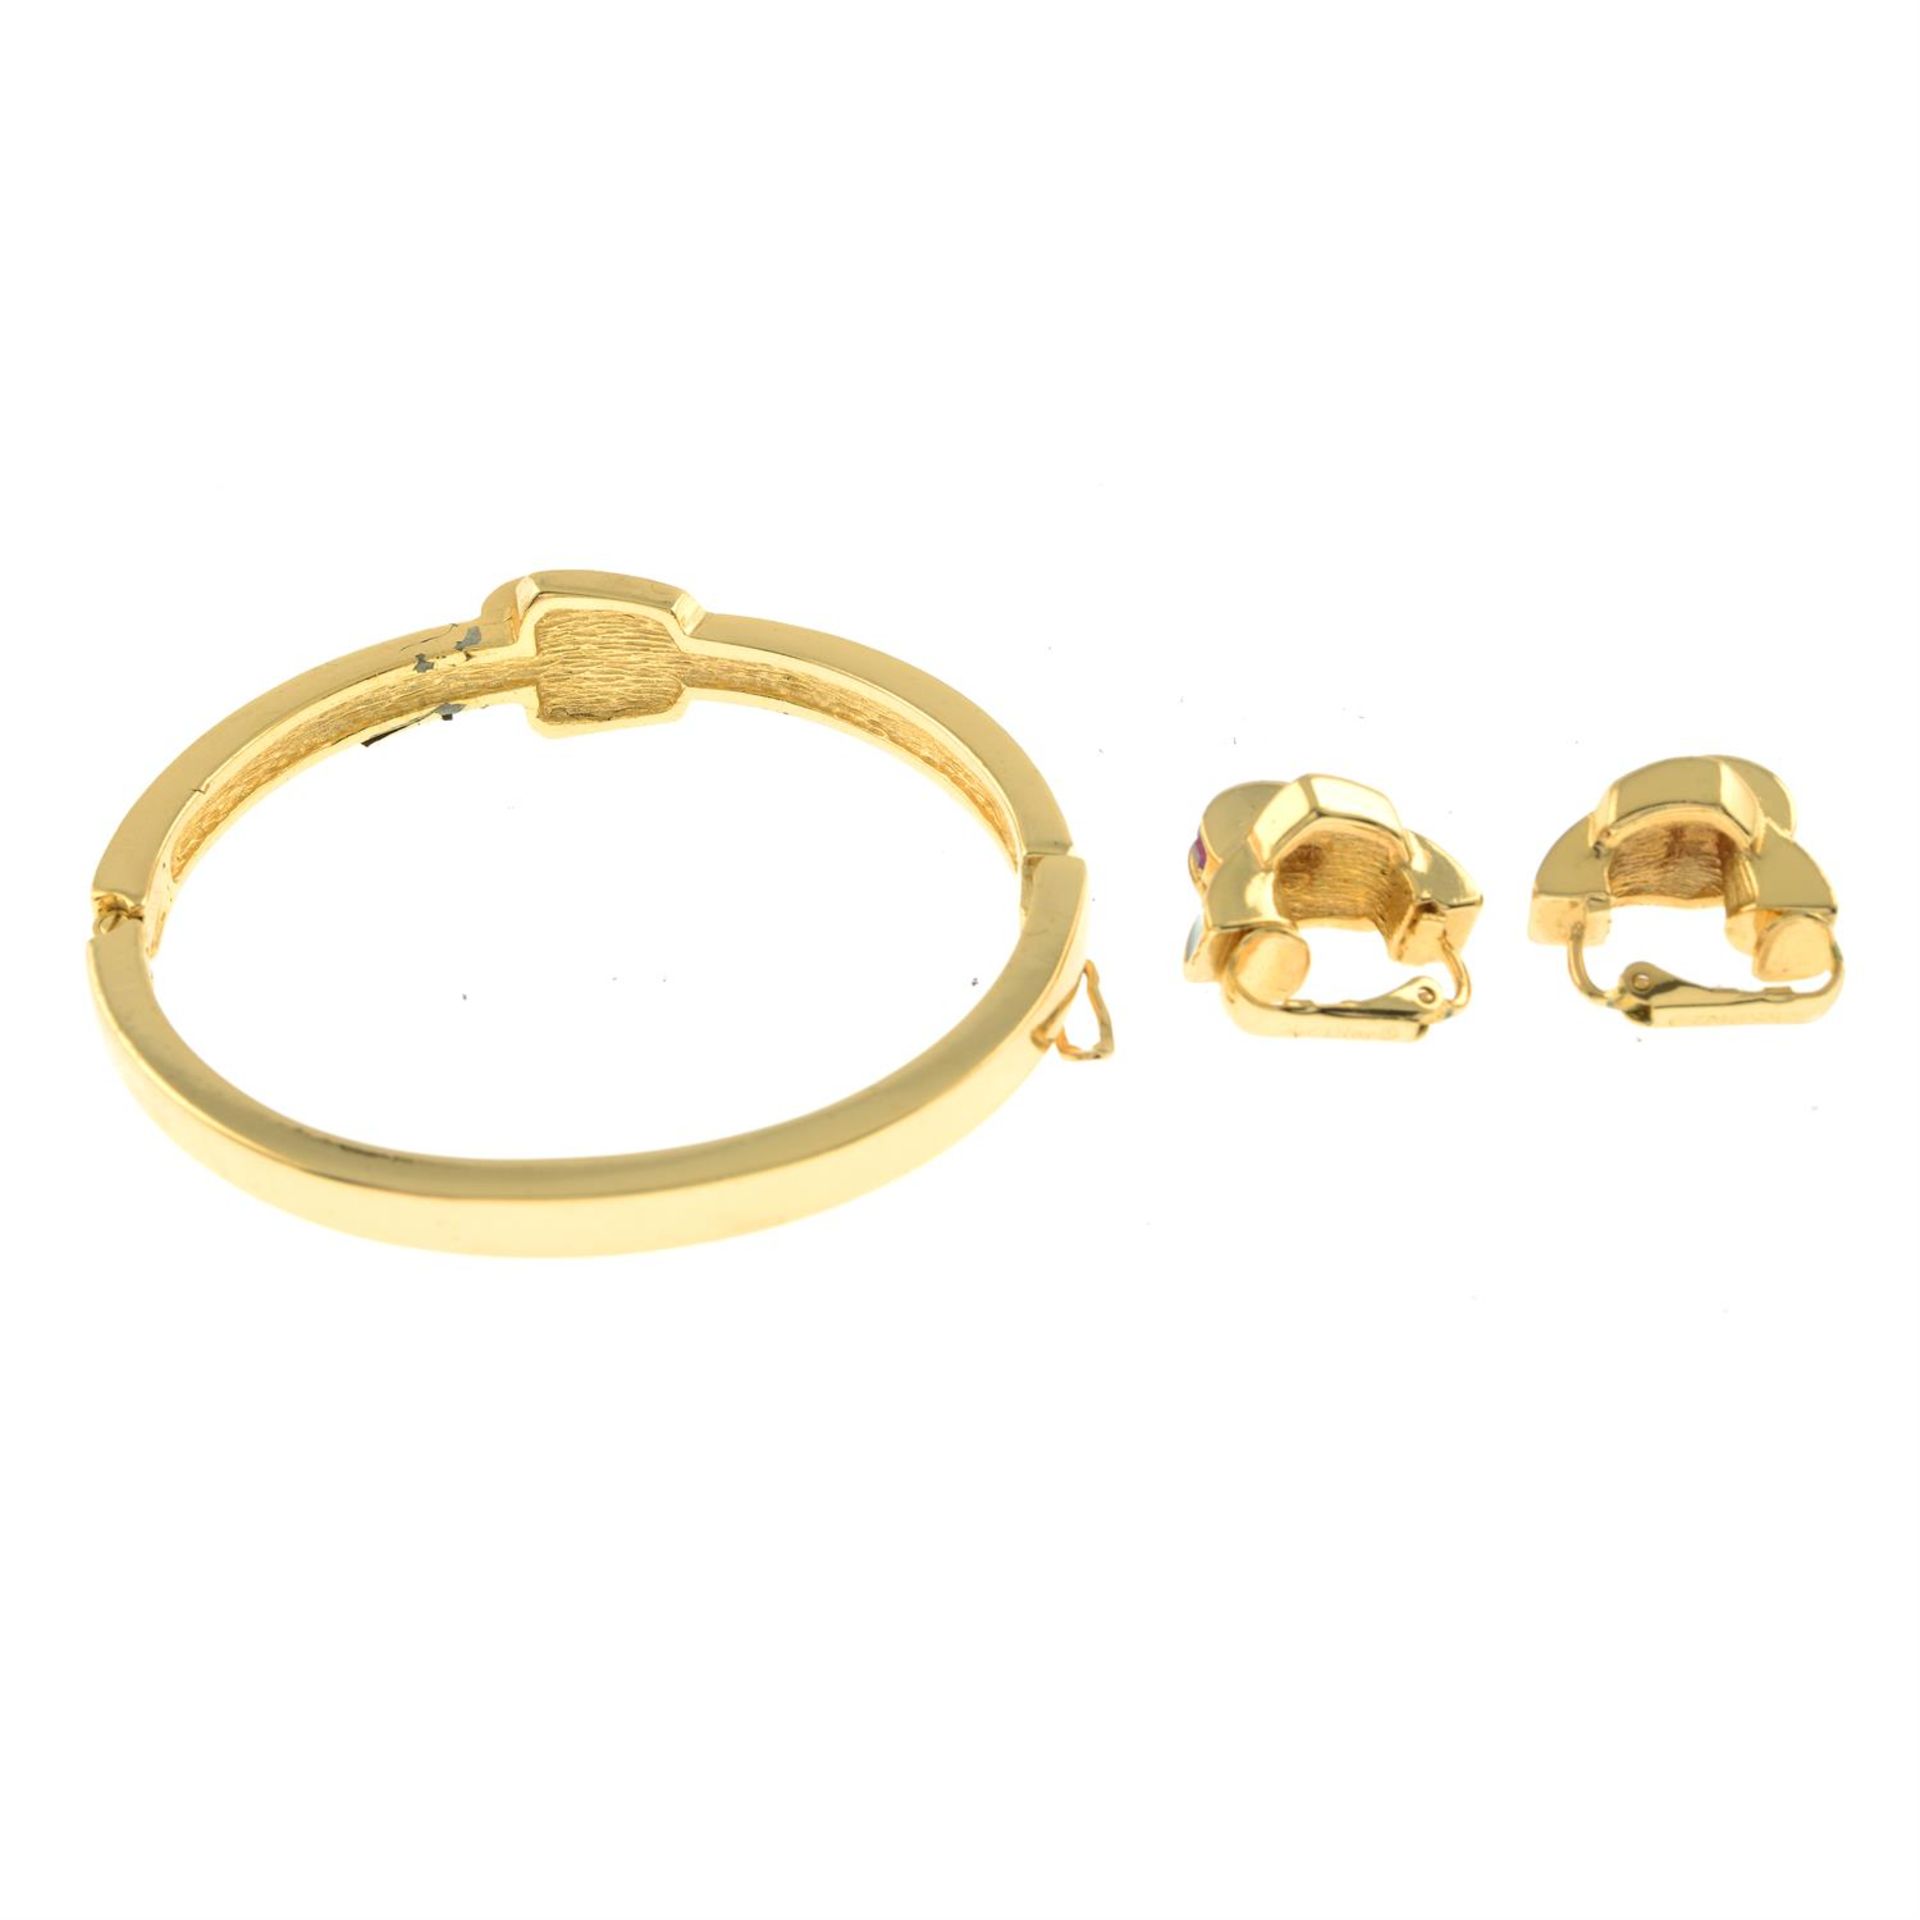 Christian Dior - bangle and clip on earring set. - Image 2 of 3